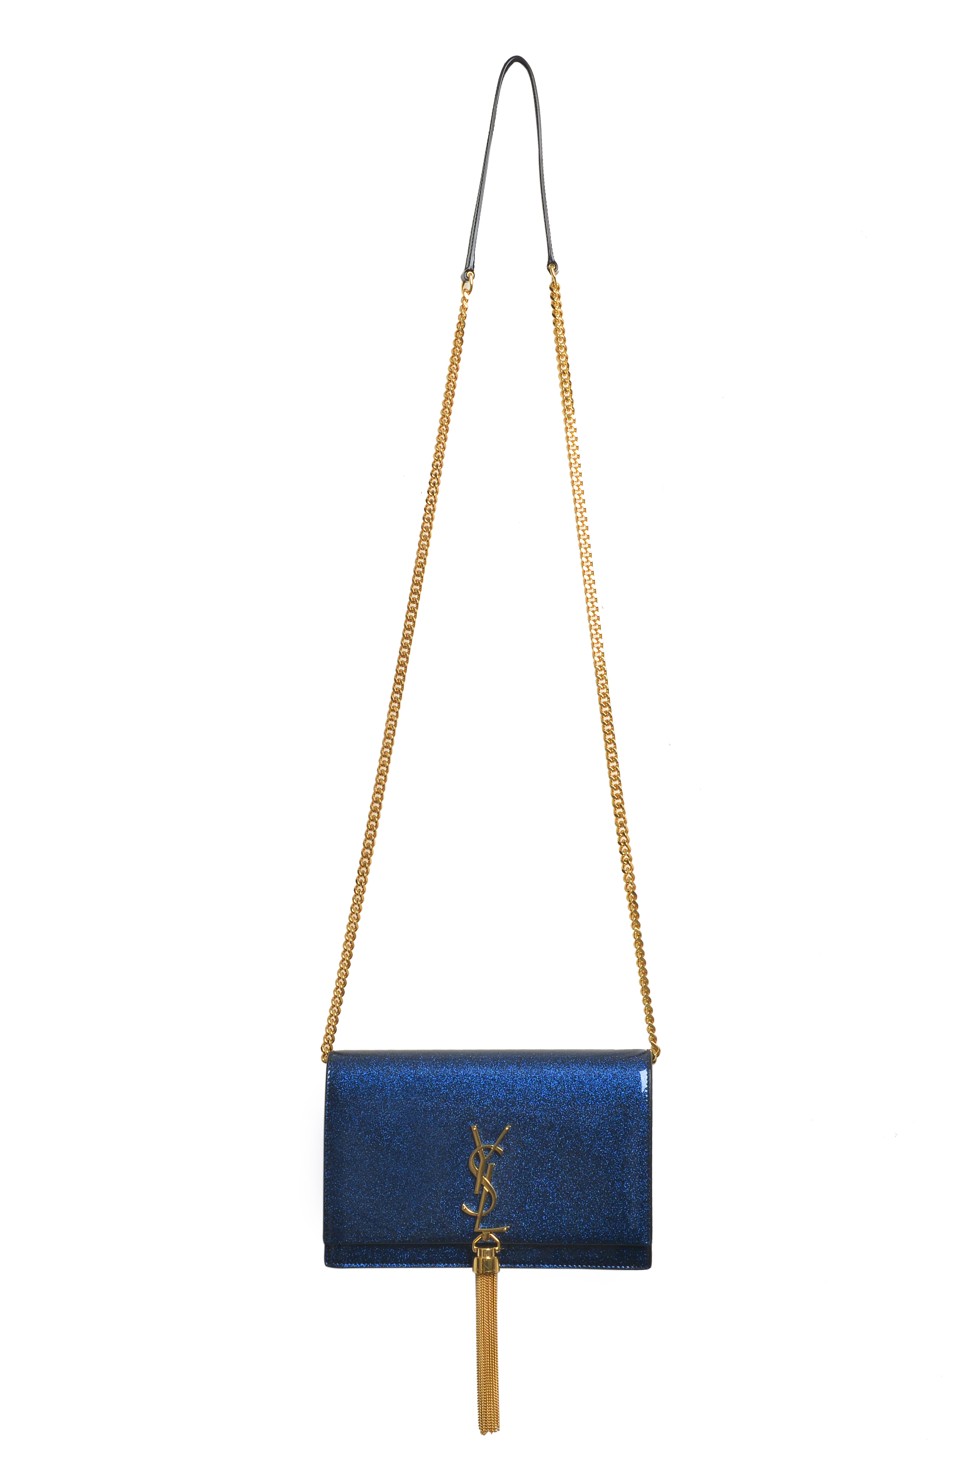 The Saint Laurent Kate Wallet on a chain in blue glitter leather costs US$1,700.